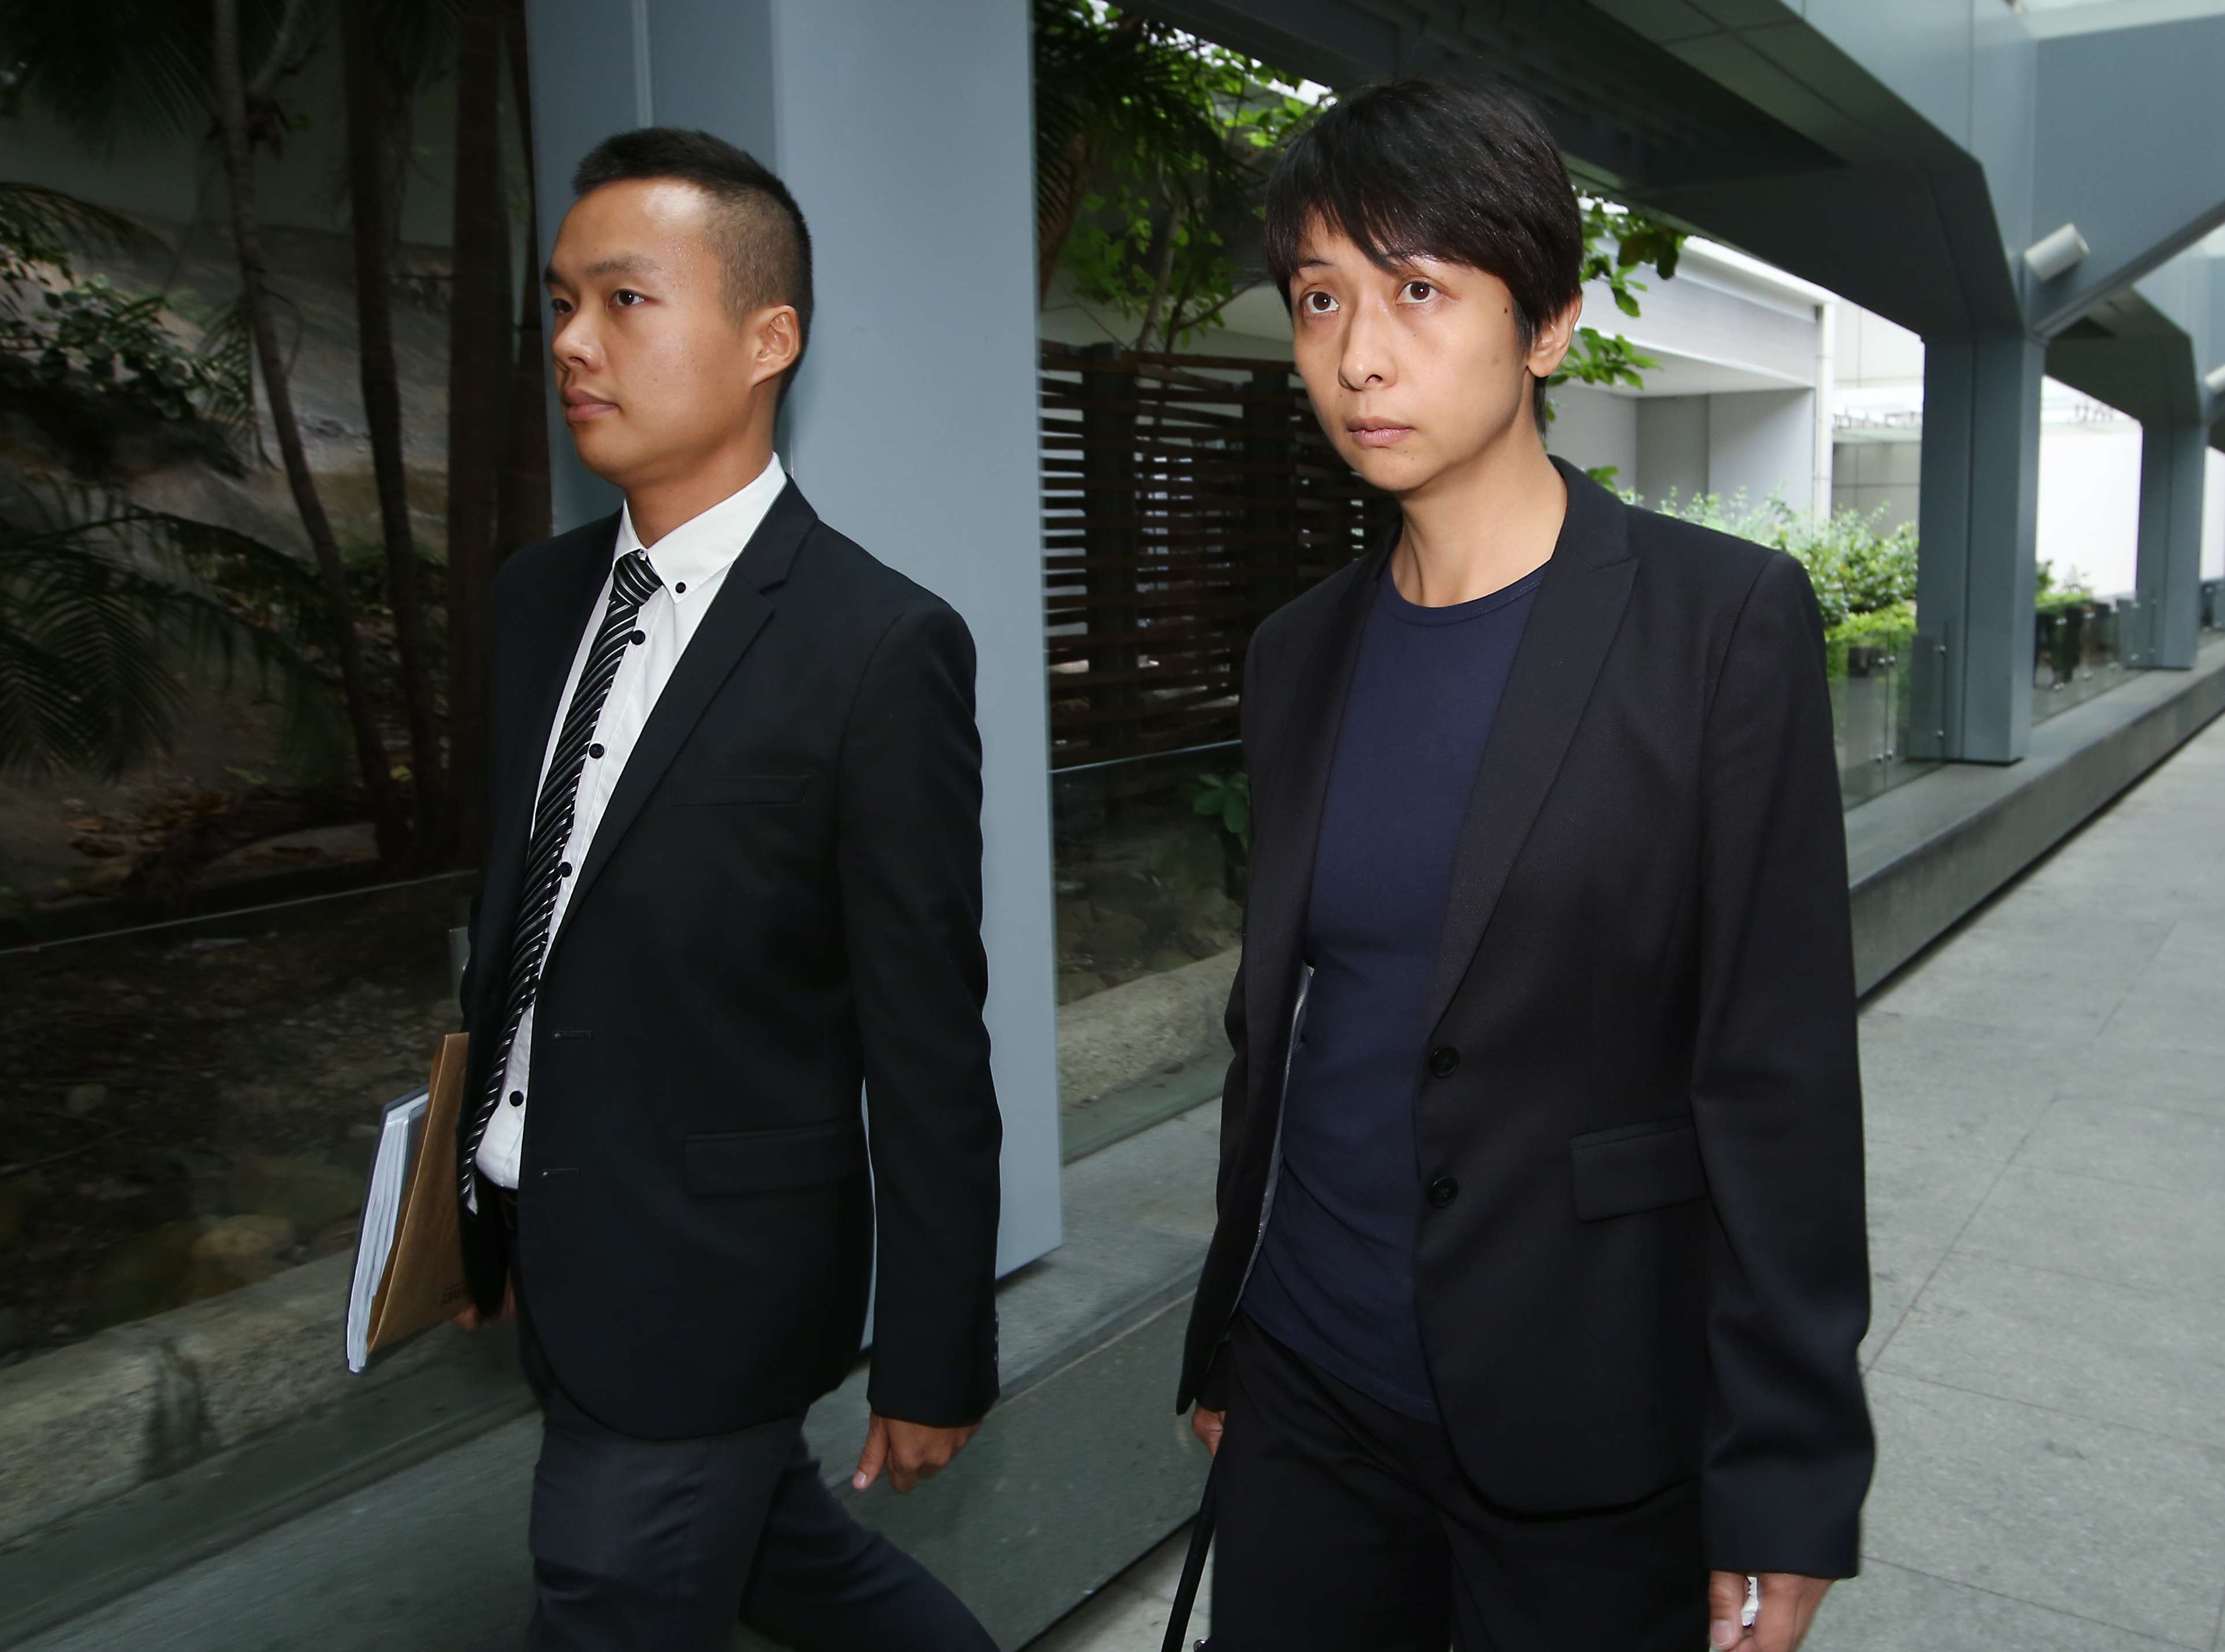 Psychiatrists Dr Oliver Chan (left) and Dr Kavin Chow, who said Jutting had exhibited traits of psychopathy, such as superficial charm and limited remorse or guilt for his behaviour. Photo: Edmond So